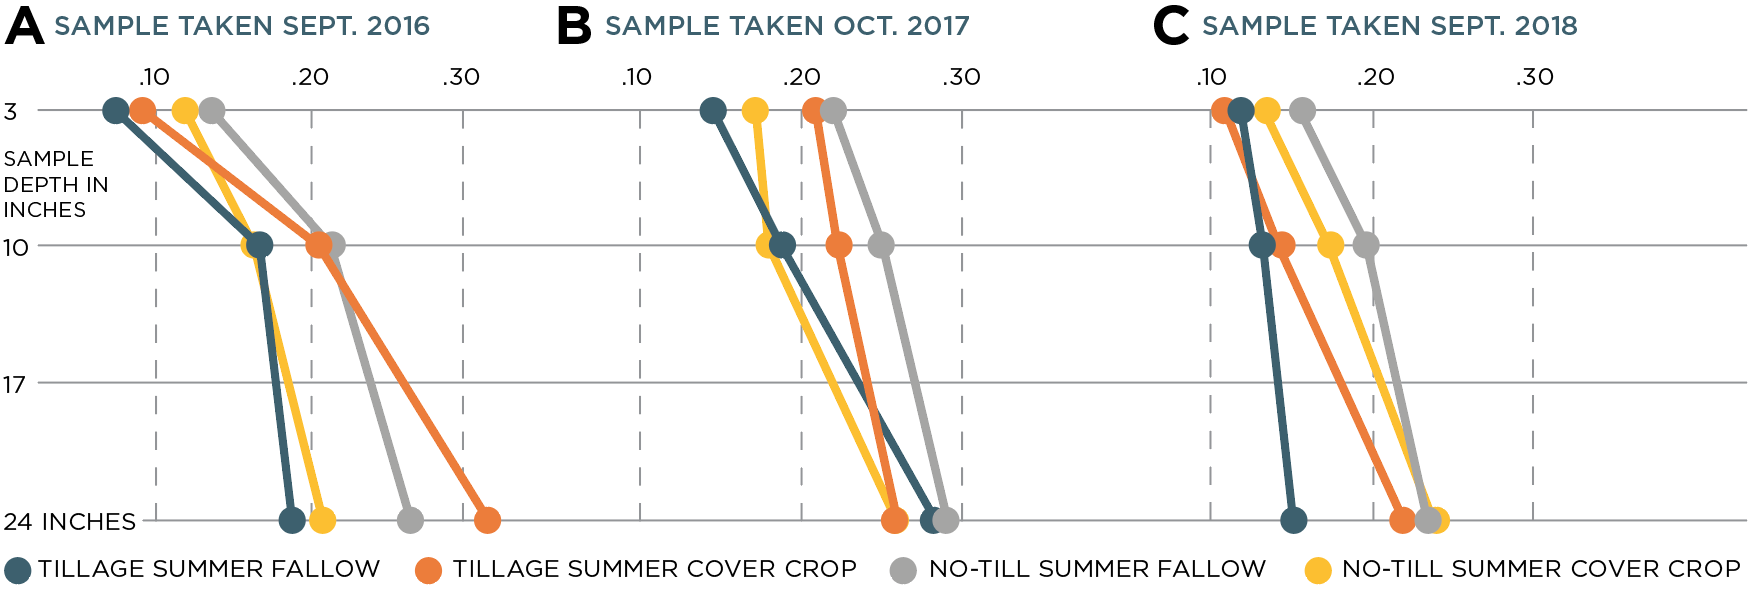 Line charts showing volumetric soil content, with differences between tillage summer fallow, tillage summer cover crop, no-till summer fallow, and no-till summer cover crop